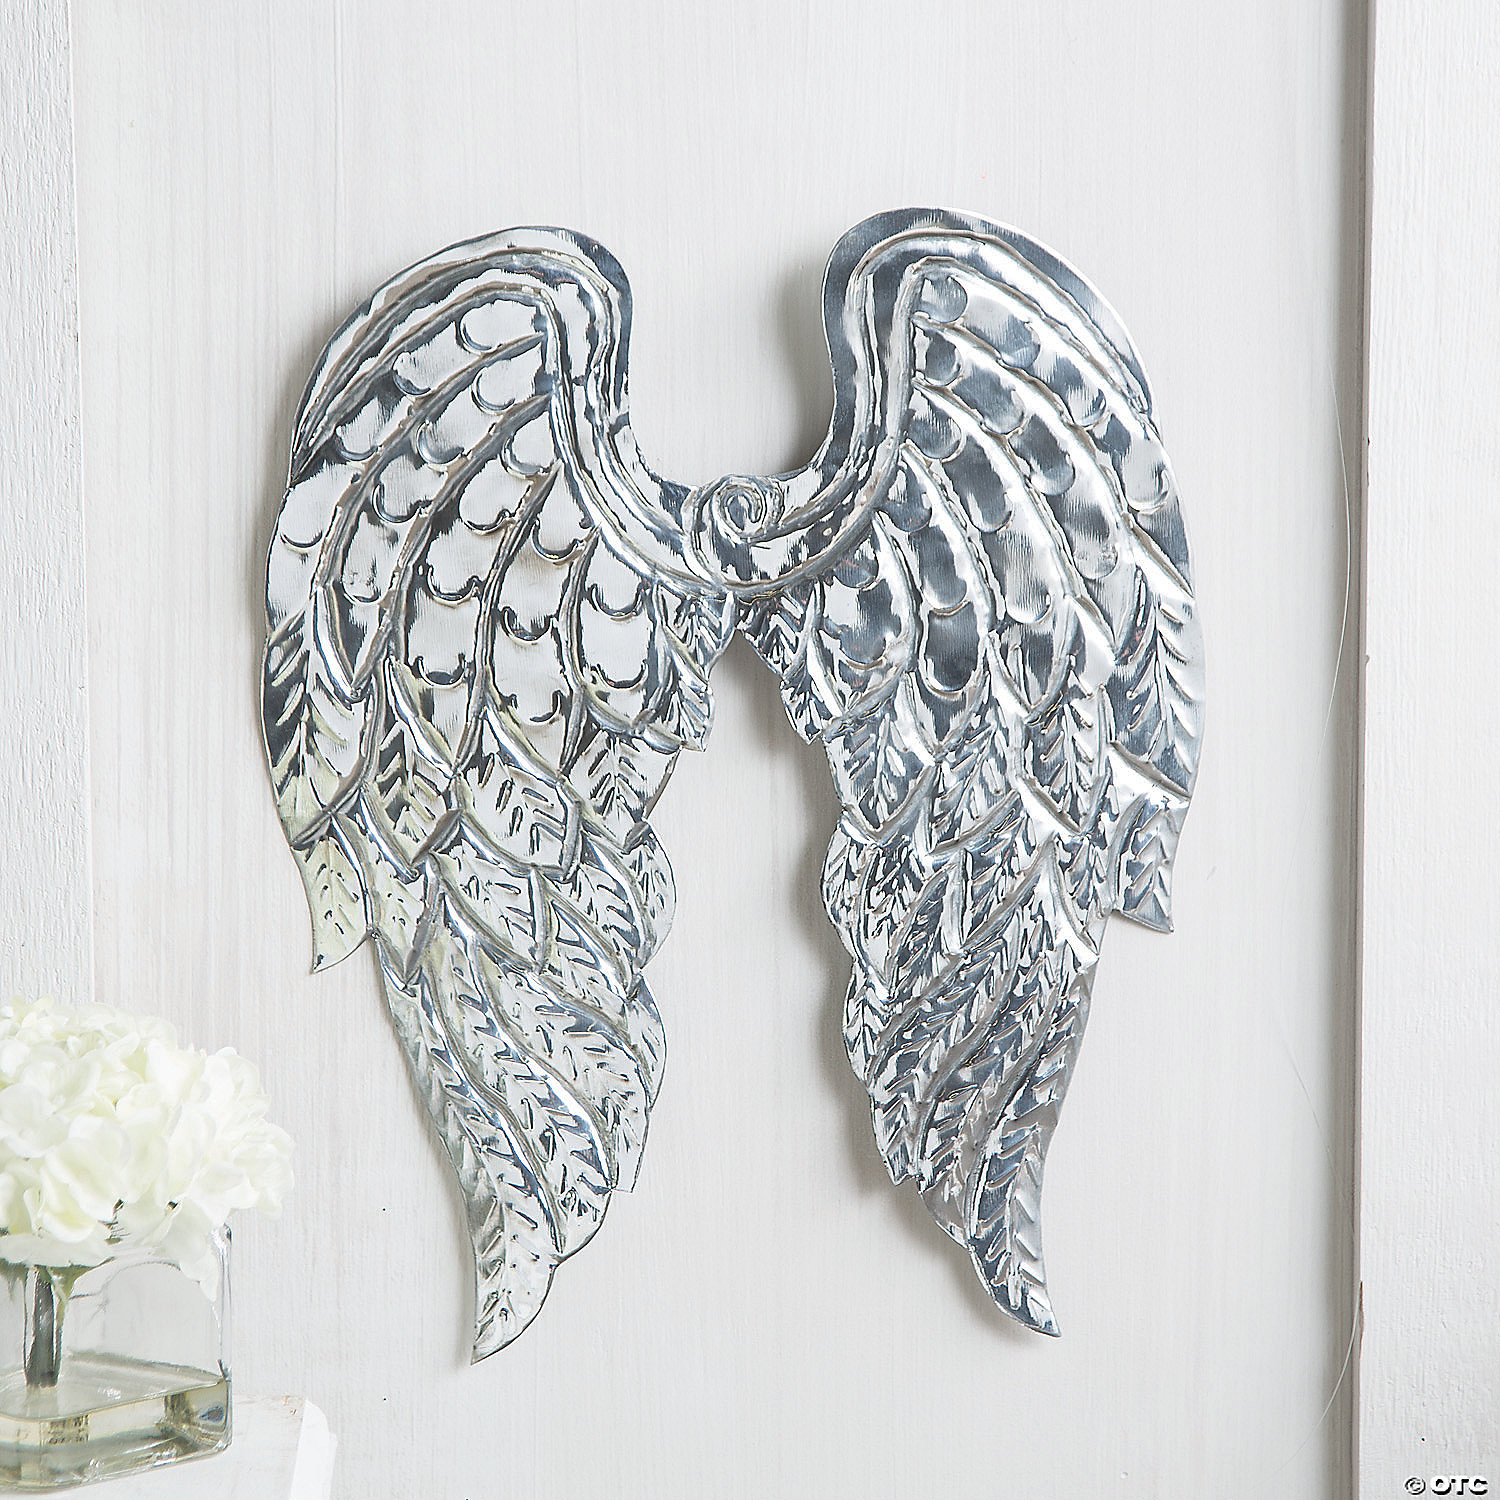 Glitter Angel & Angel Wings Canvas Wall Art Home Decoration Hanging Pictures New 